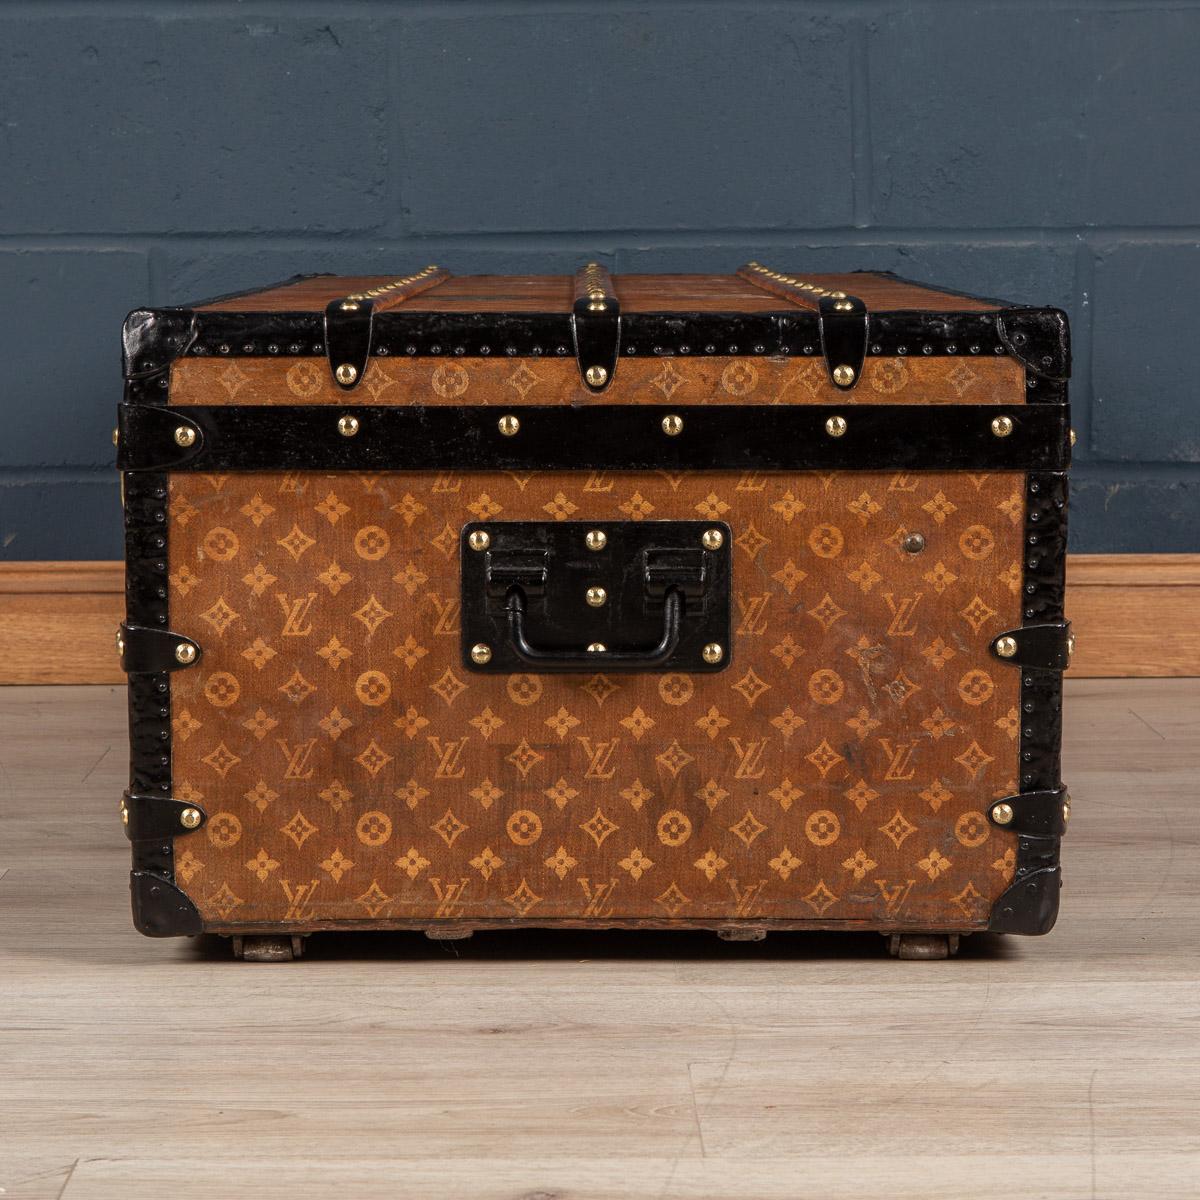 French 20th Century Oversized Louis Vuitton Trunk in Woven Canvas, Paris, C.1900